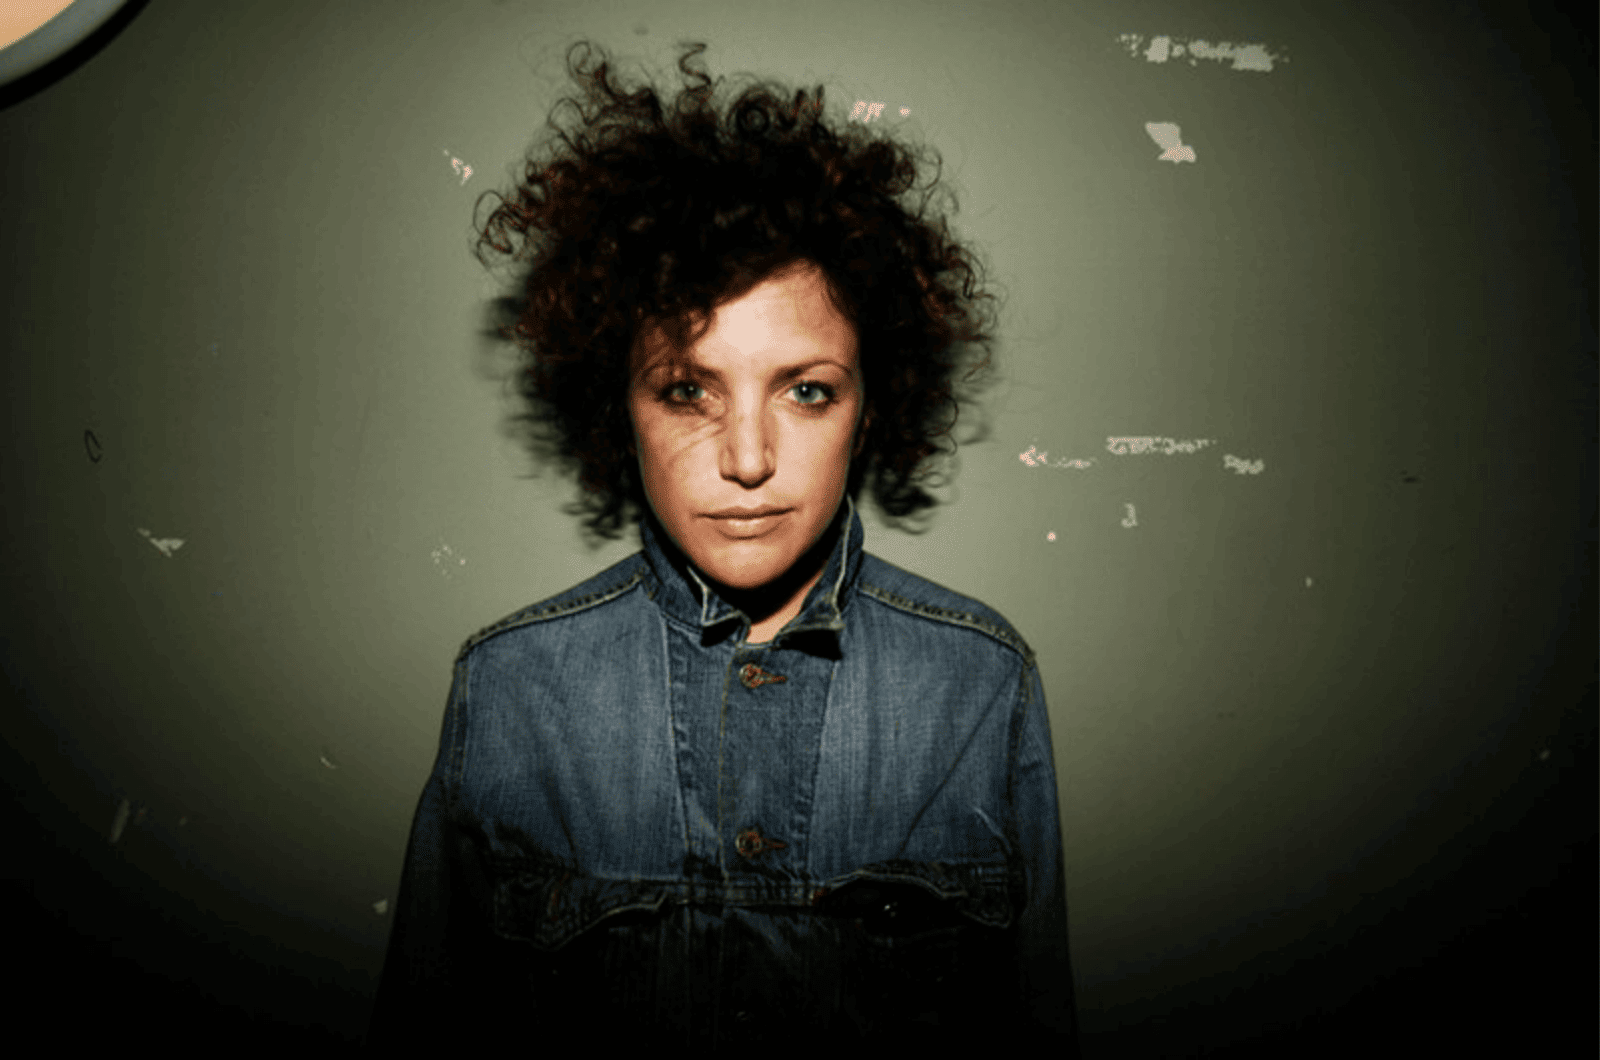 Annie Mac says there’s a ‘Tidal Wave’ of unreported sexual abuse cases in the music industry